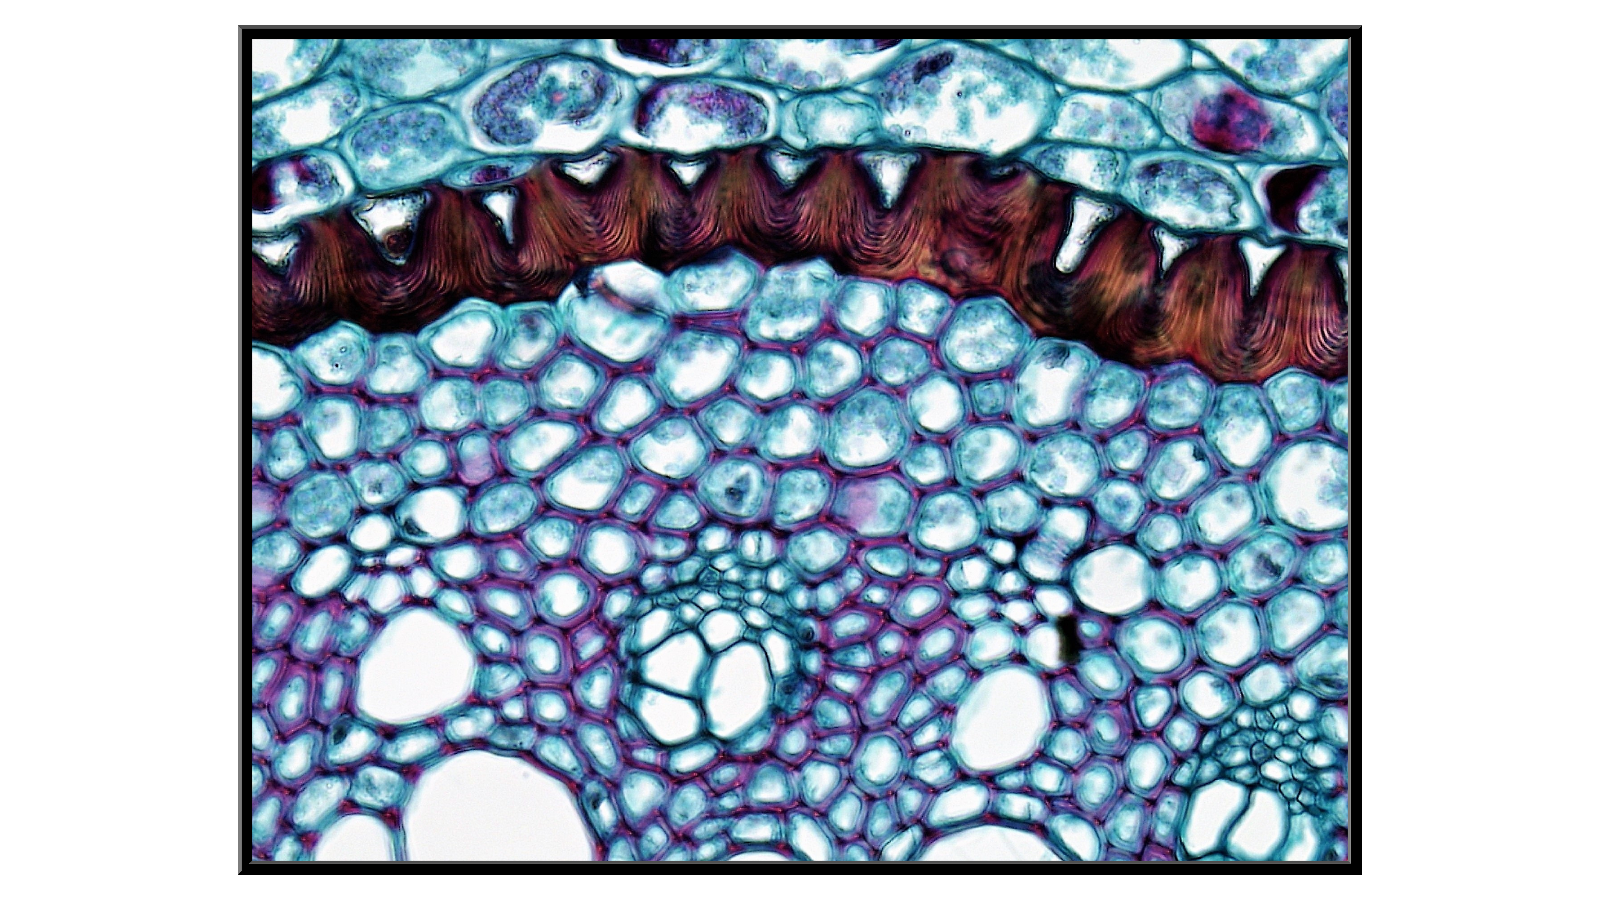 Cross-section through a Smilax root - 2